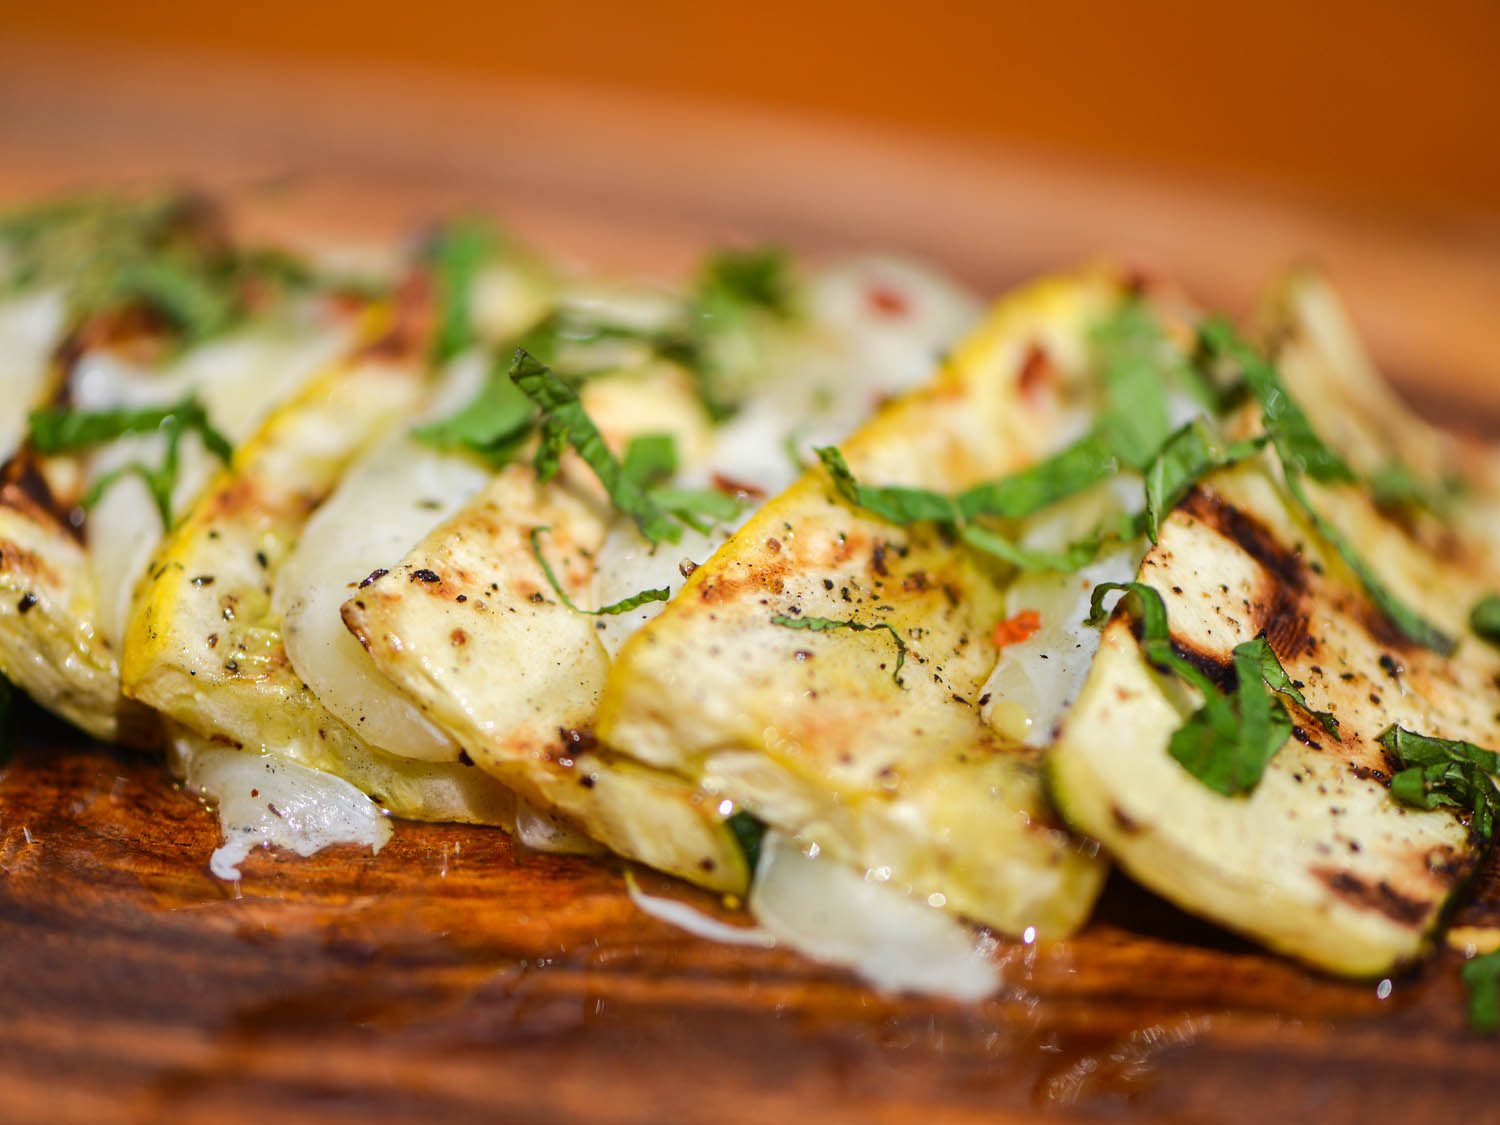 Grilled Summer Squash
 Grilled Summer Squash and Kasseri Cheese With Lemon and